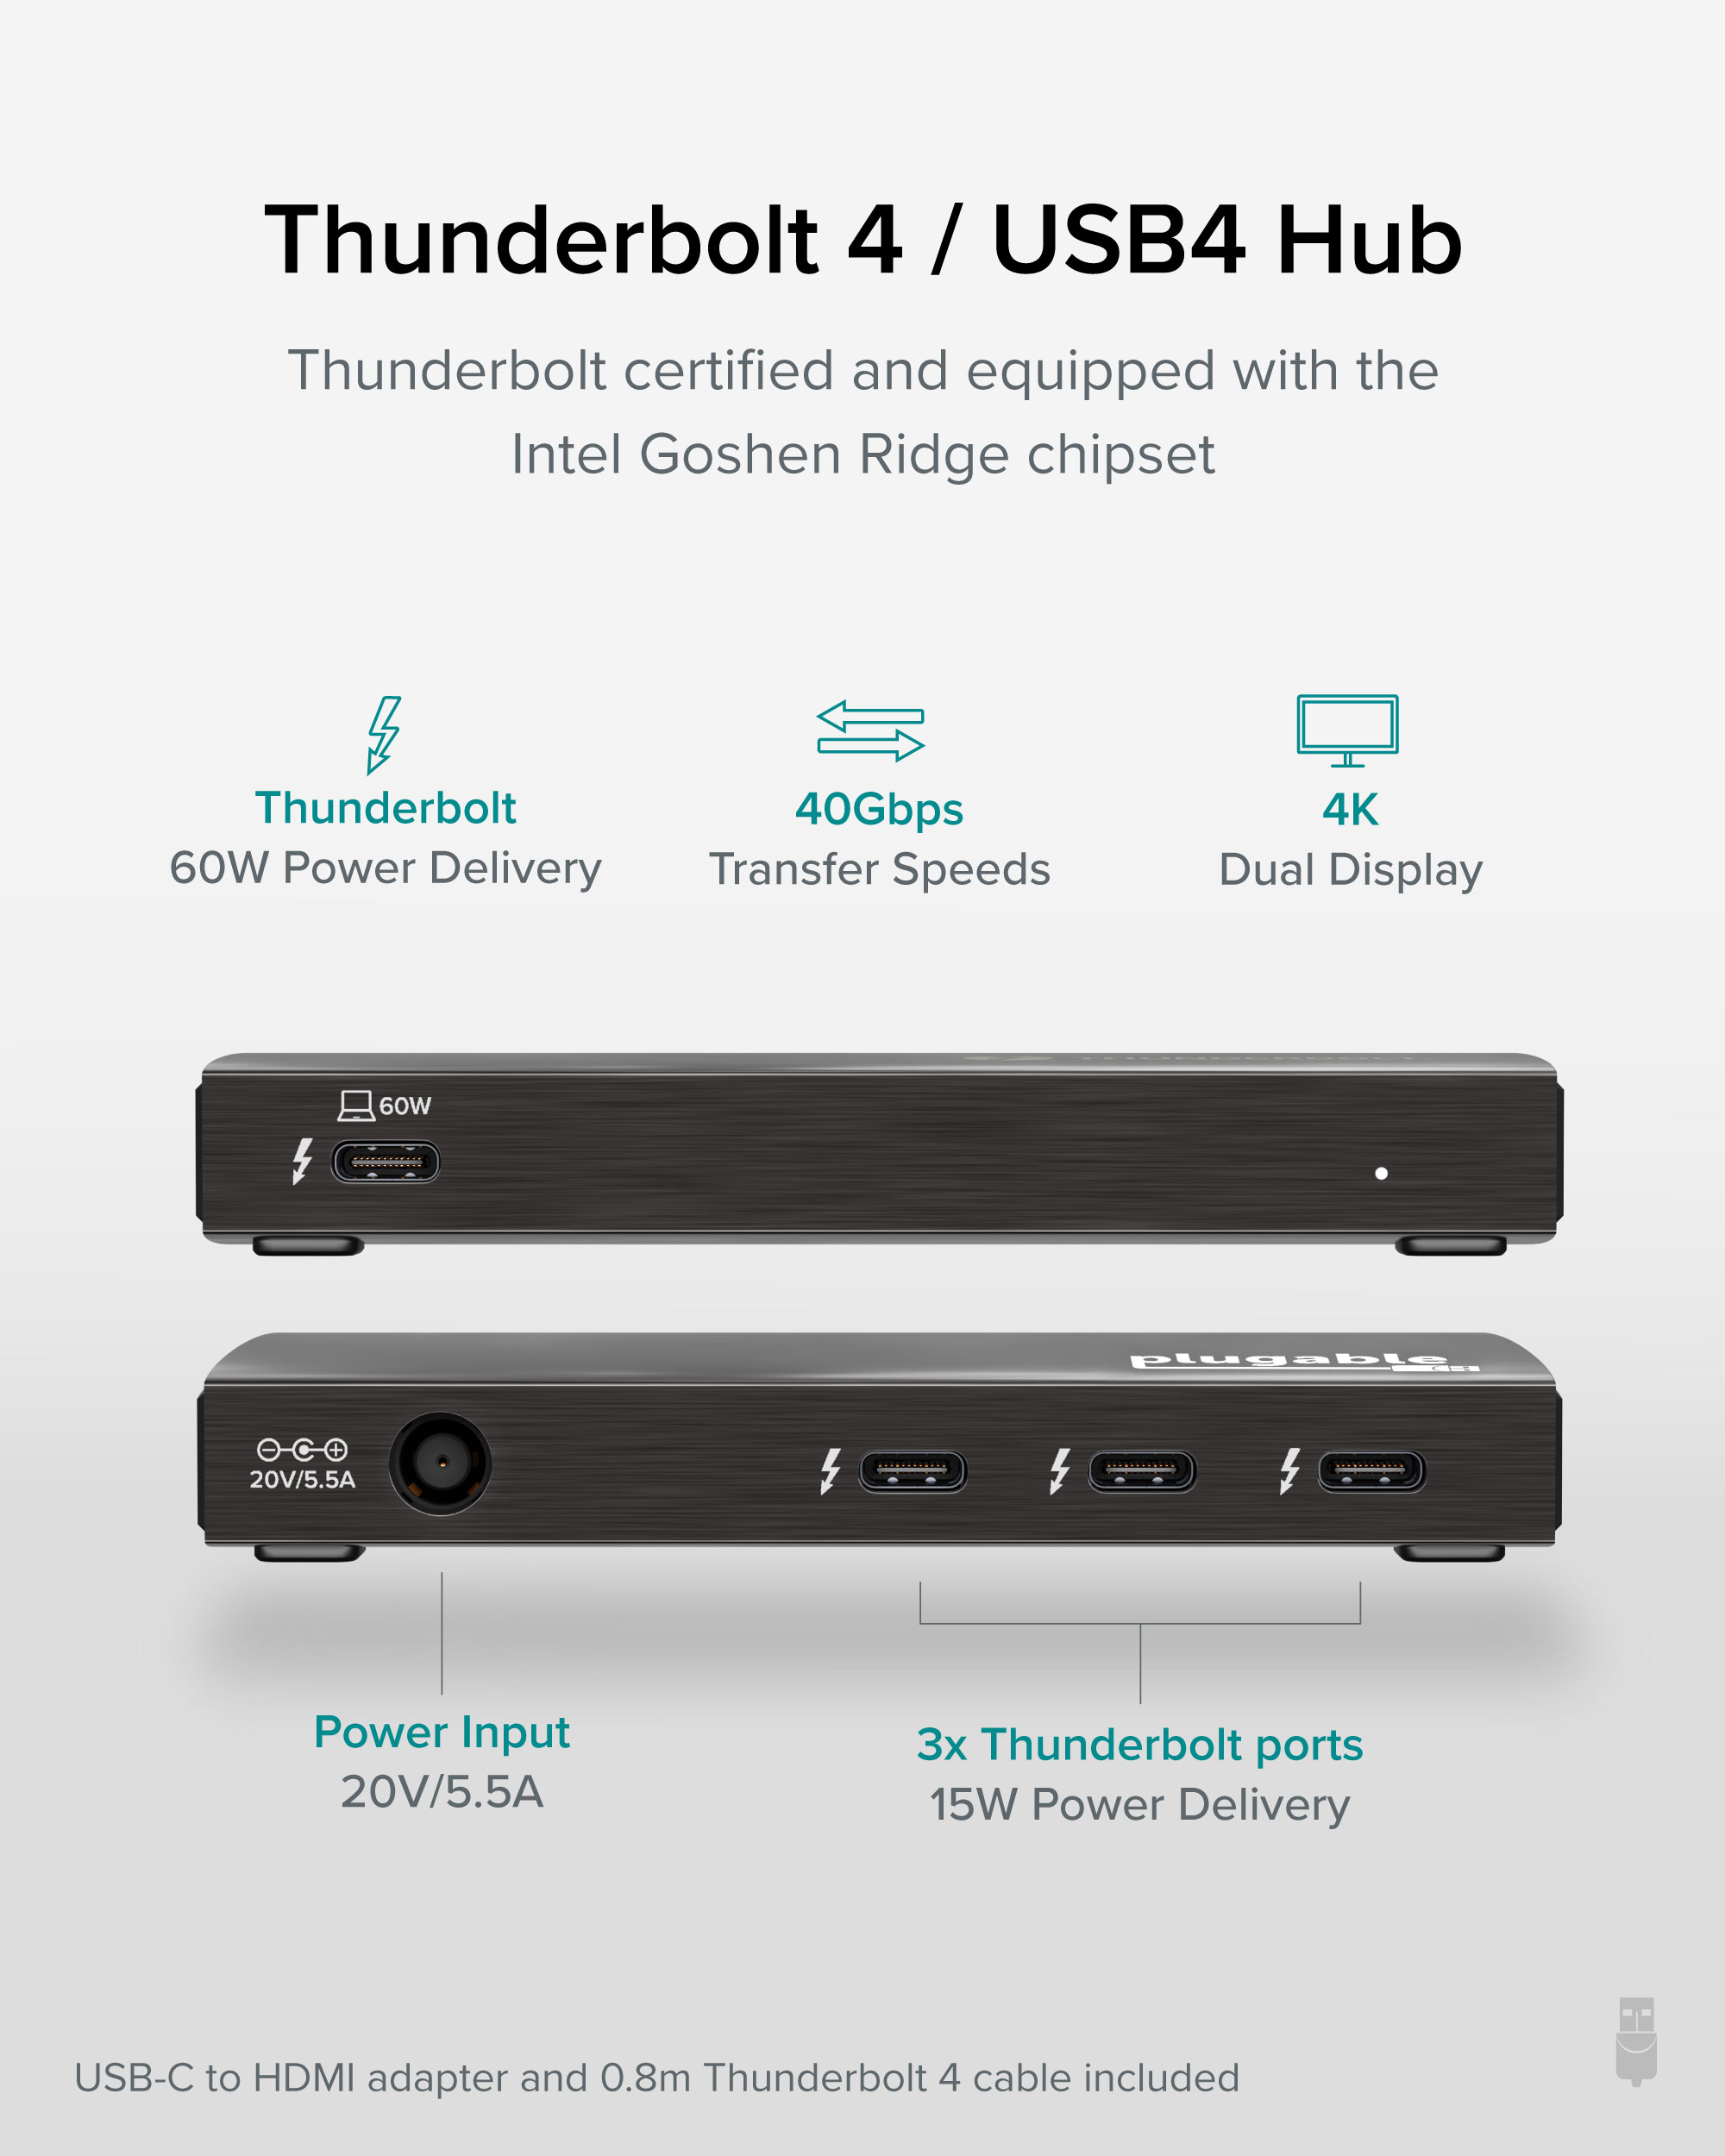 Plugable Thunderbolt™ 3 Dual Display HDMI 2.0 Adapter for Mac and Wind –  Plugable Technologies